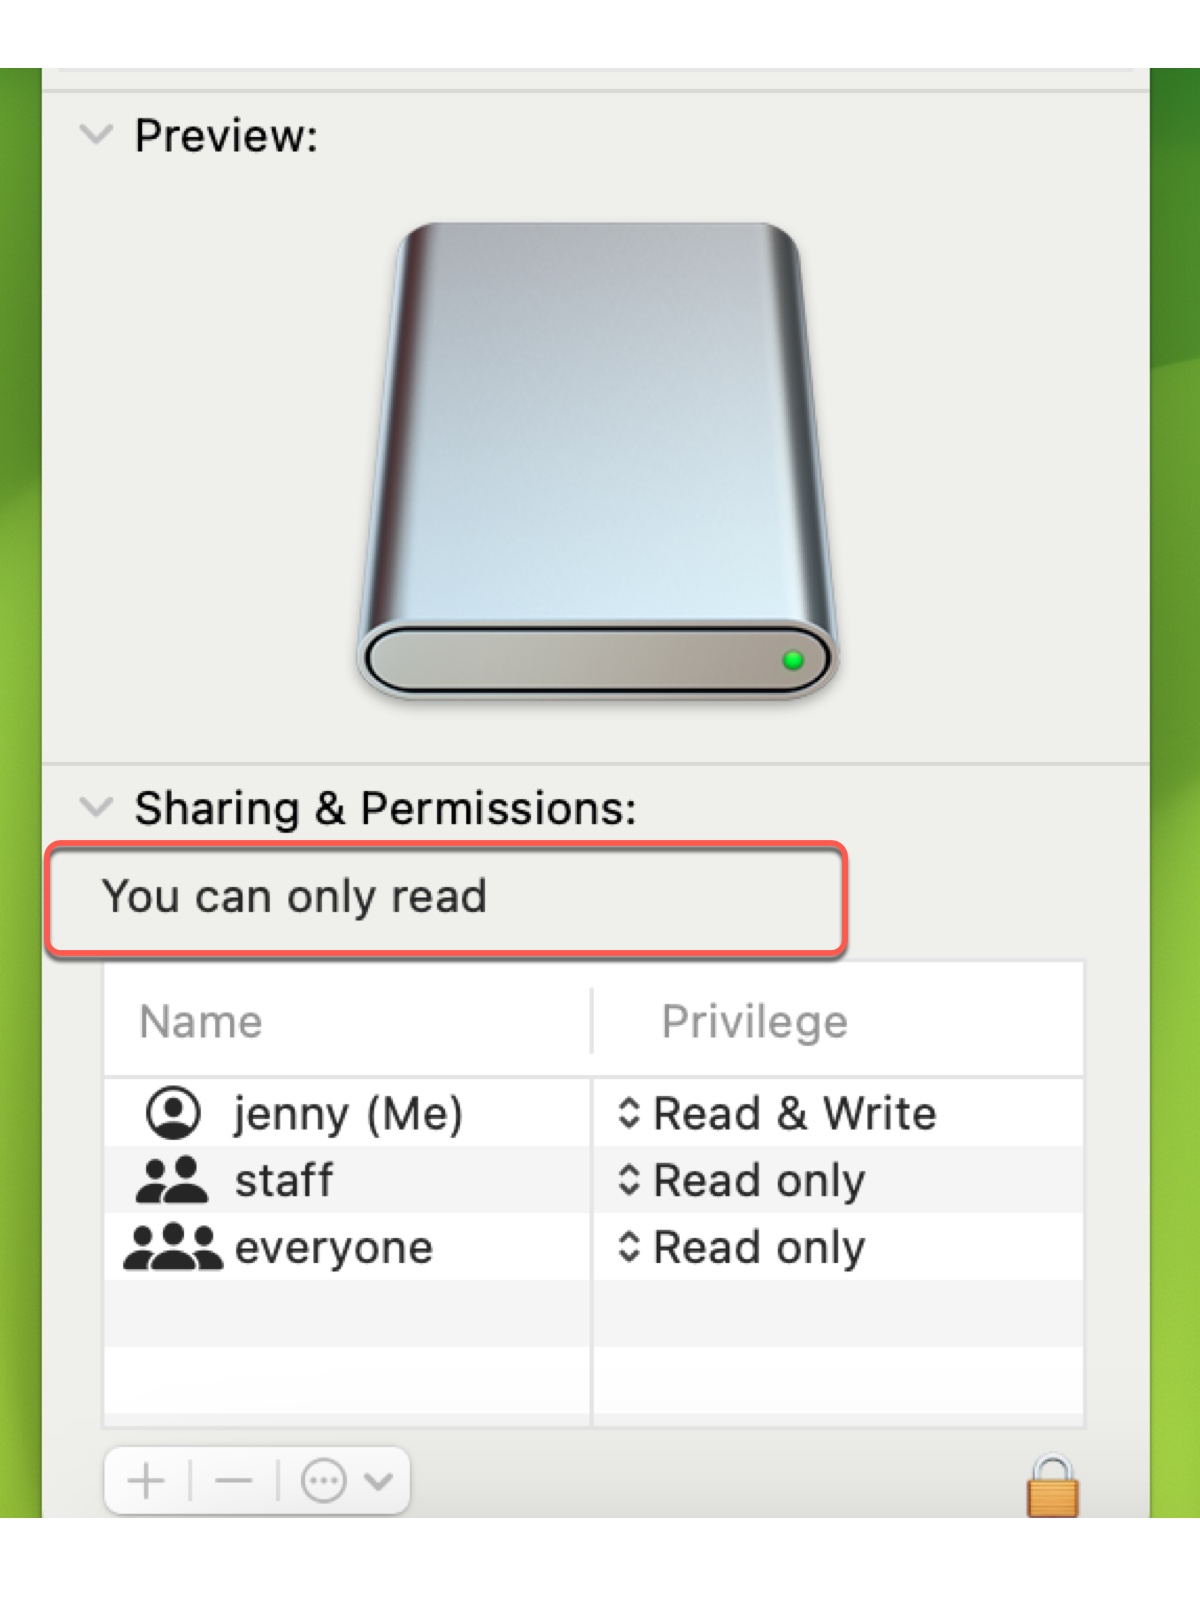 You can only read external hard drive on Mac